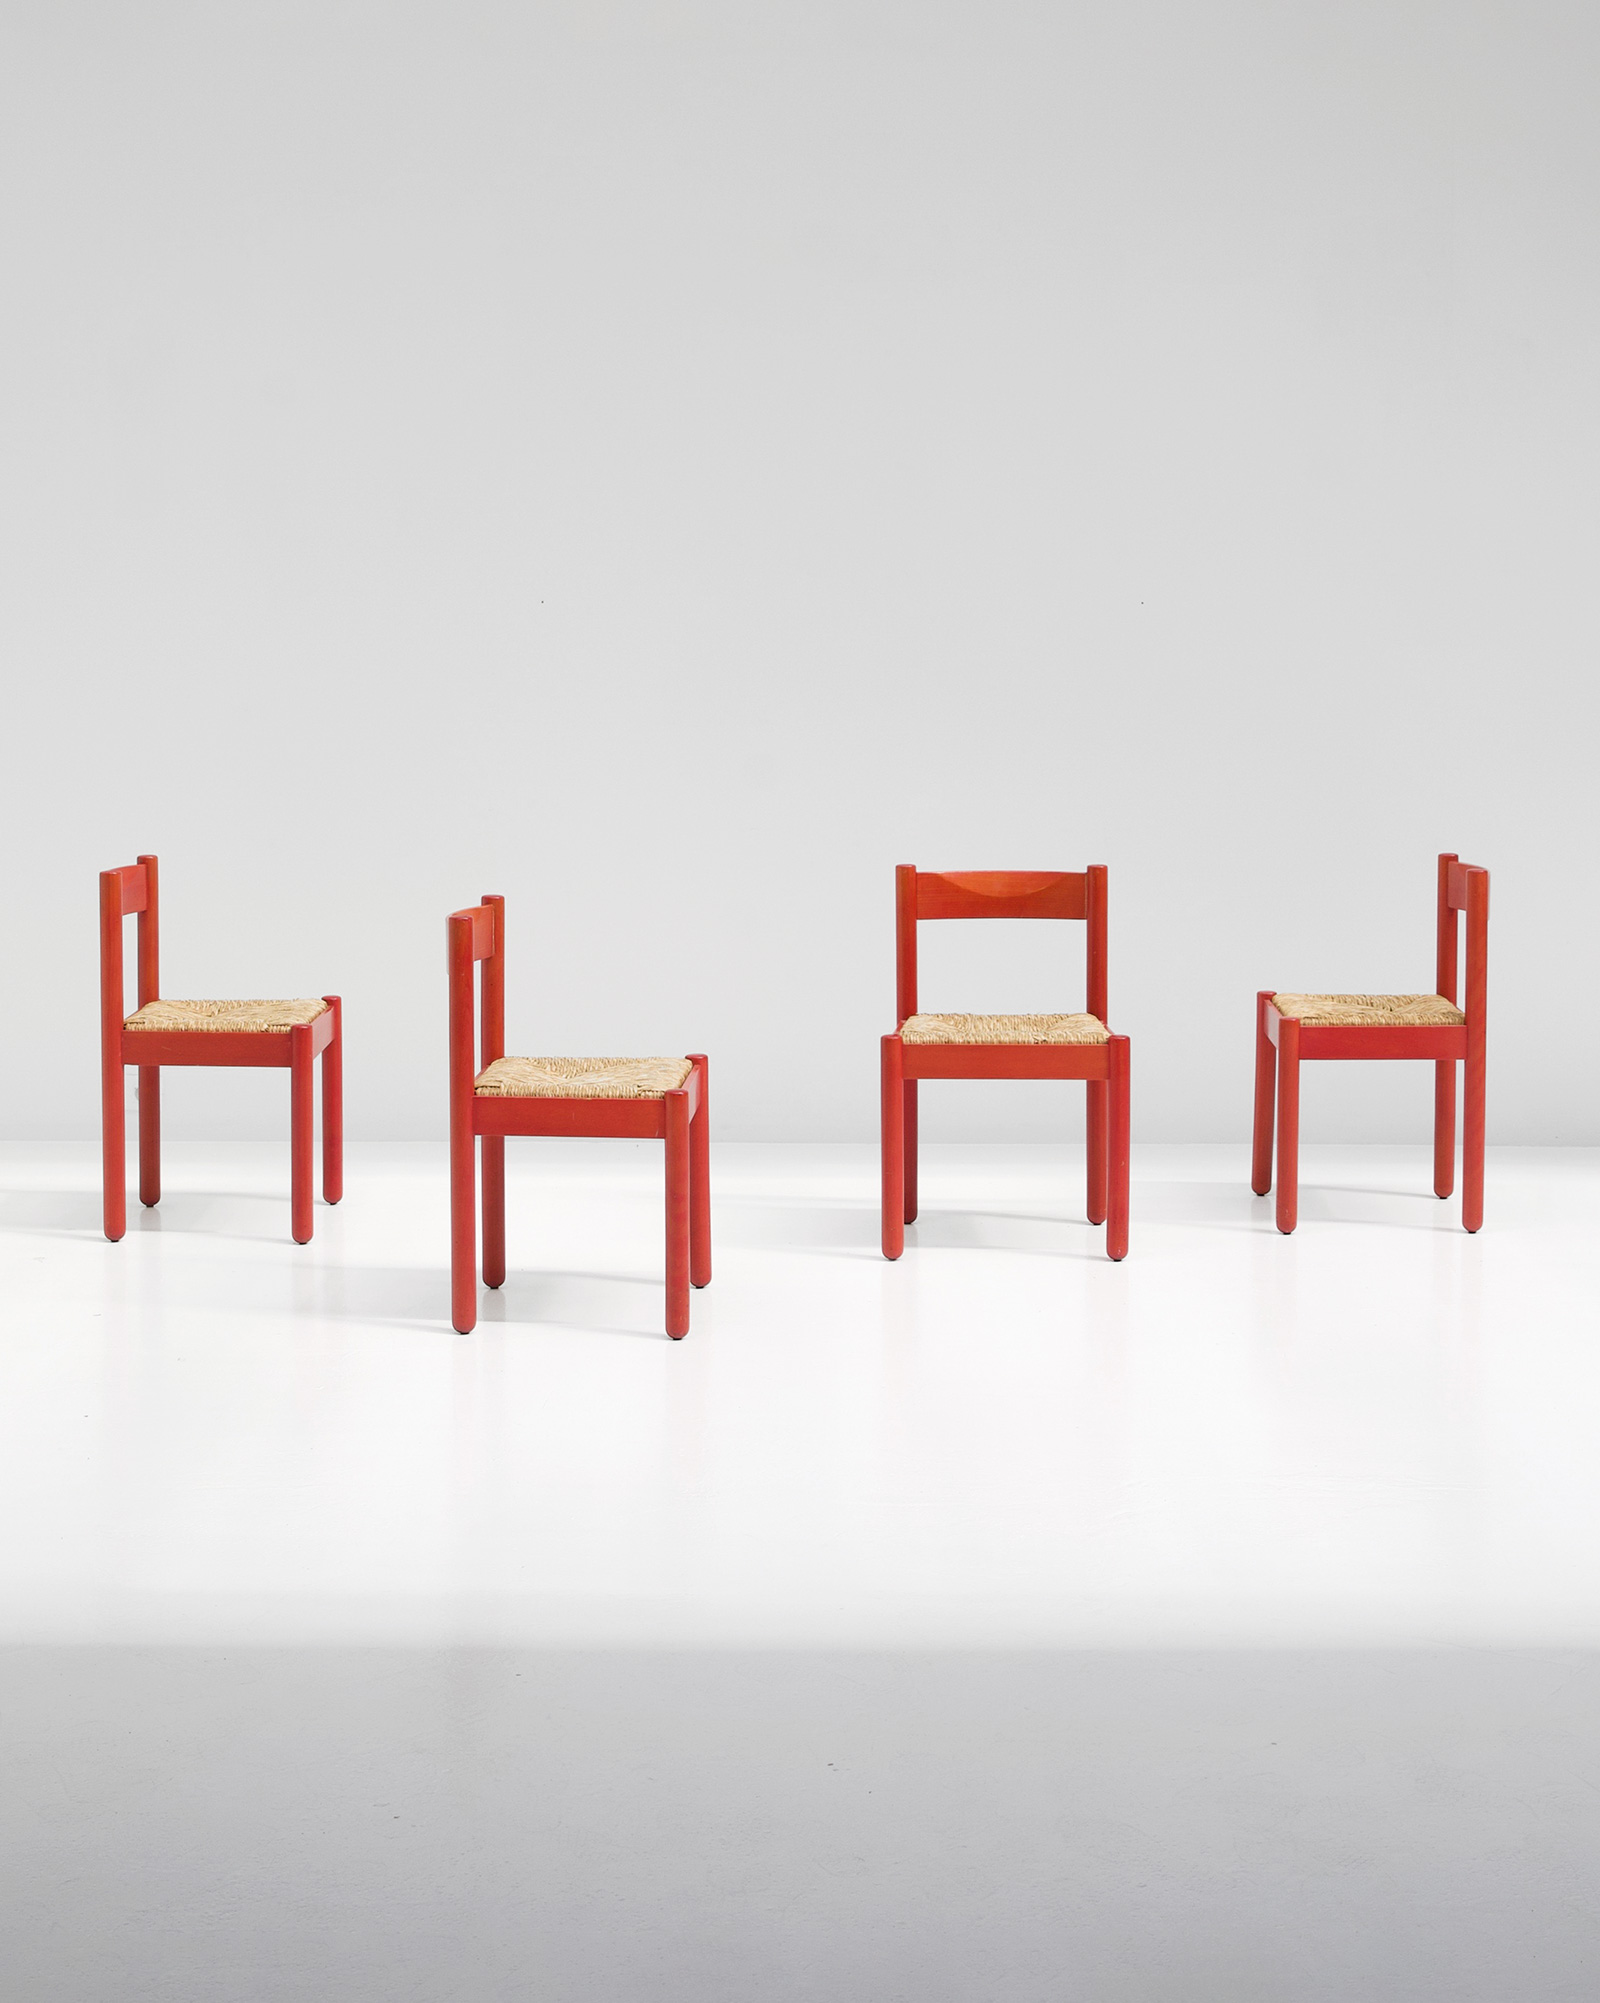 Carimate Chairs by Vico Magistretti for Cassinaimage 1